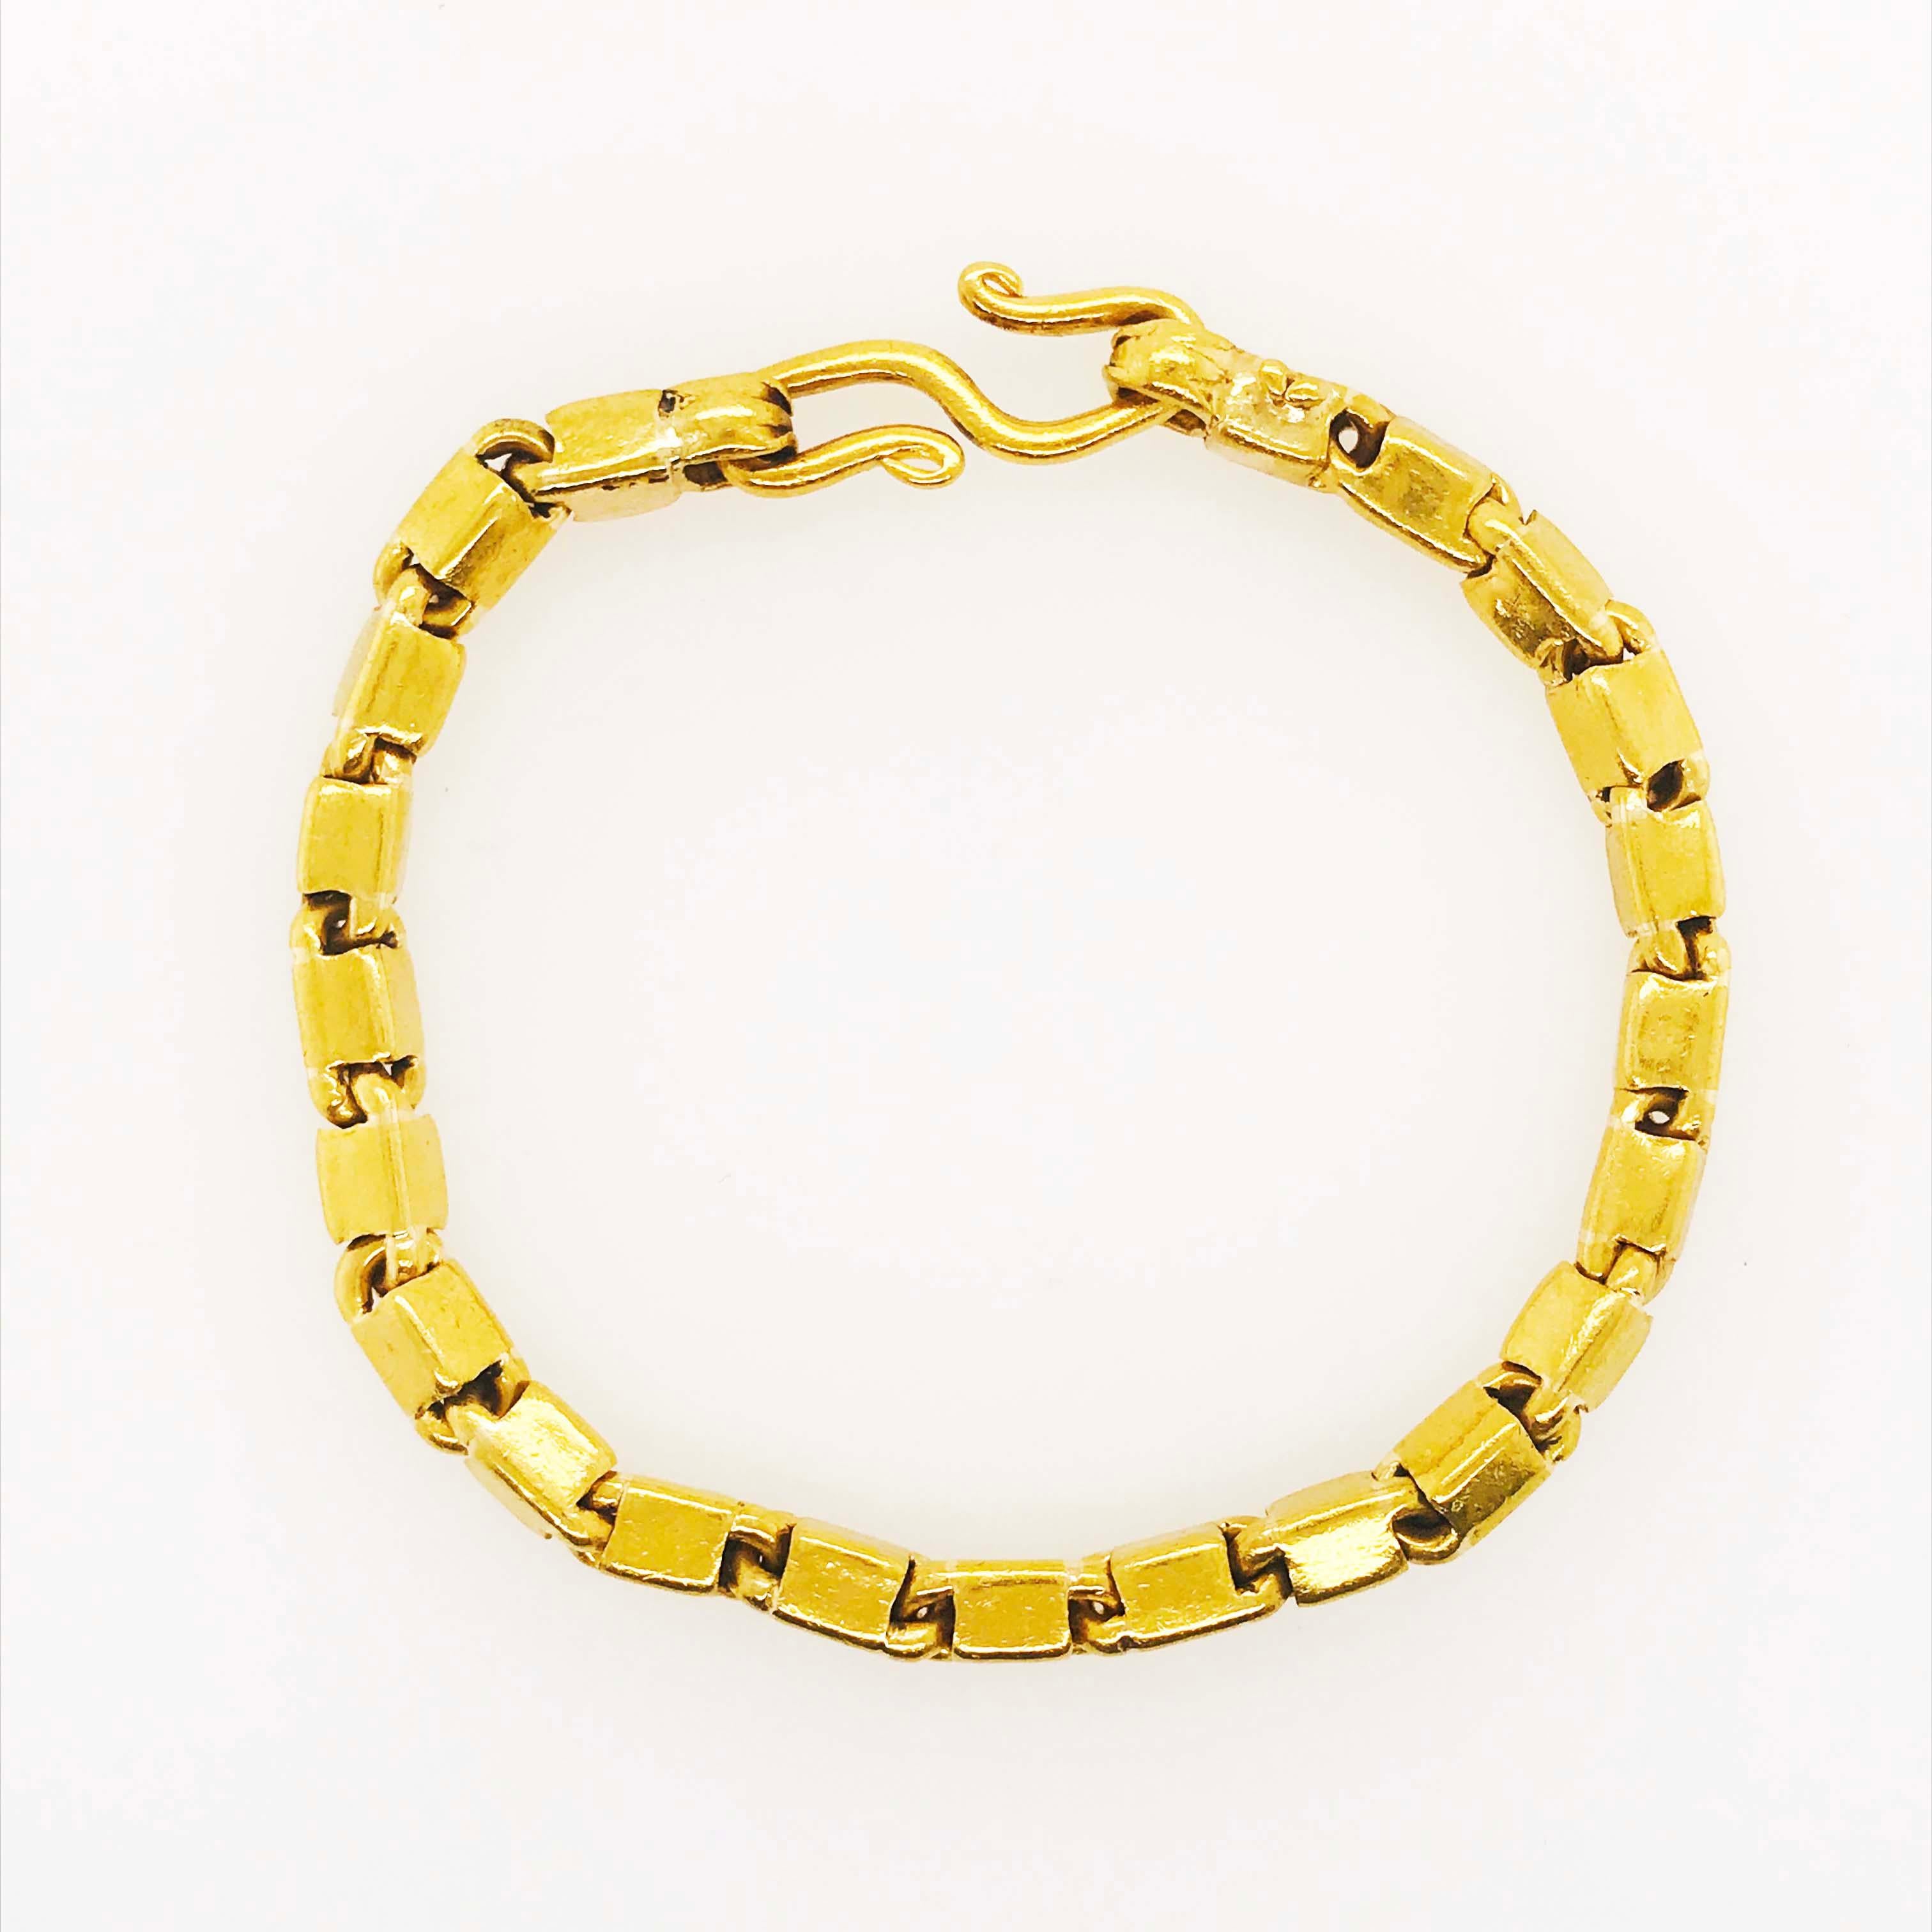 The 22 karat solid gold Baht bracelet is the perfect chain link to wear every day!  The gold is heavy and it speaks of strength and endurance.  The length of the bracelet is 8 inches but it could be shortened by removing the links.  The rich 22